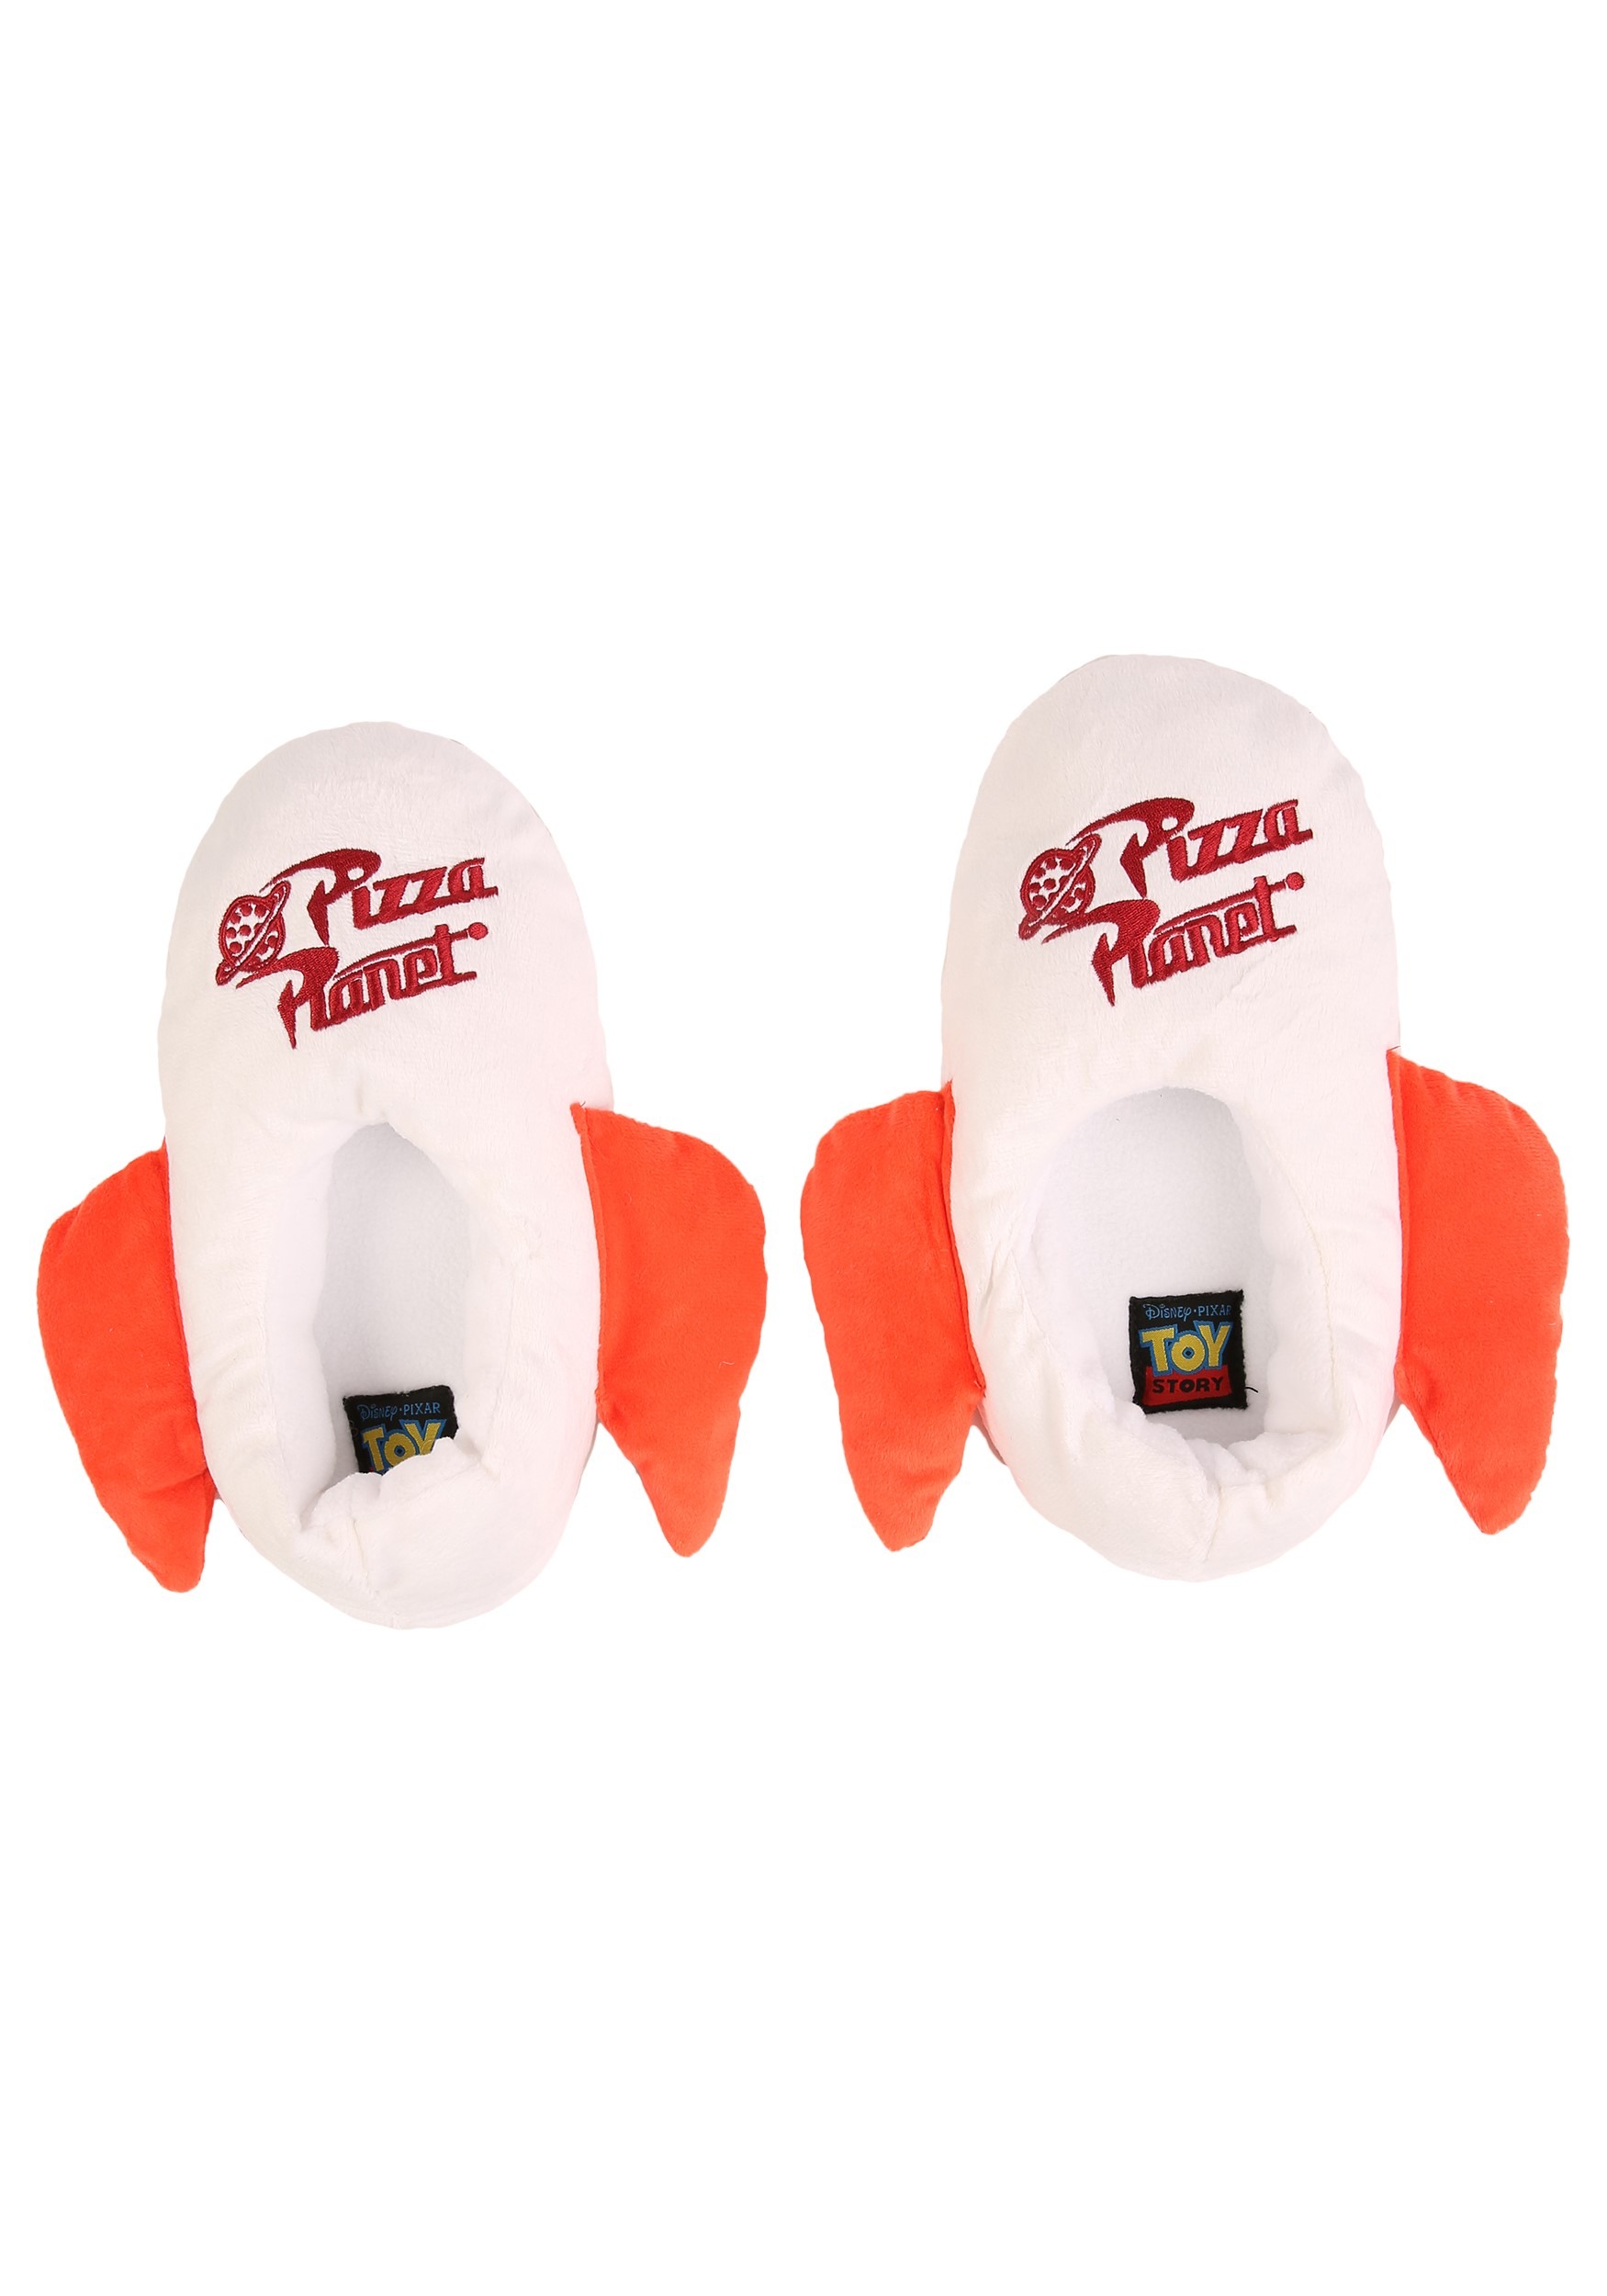 Men's Toy Story Pizza Planet Slippers